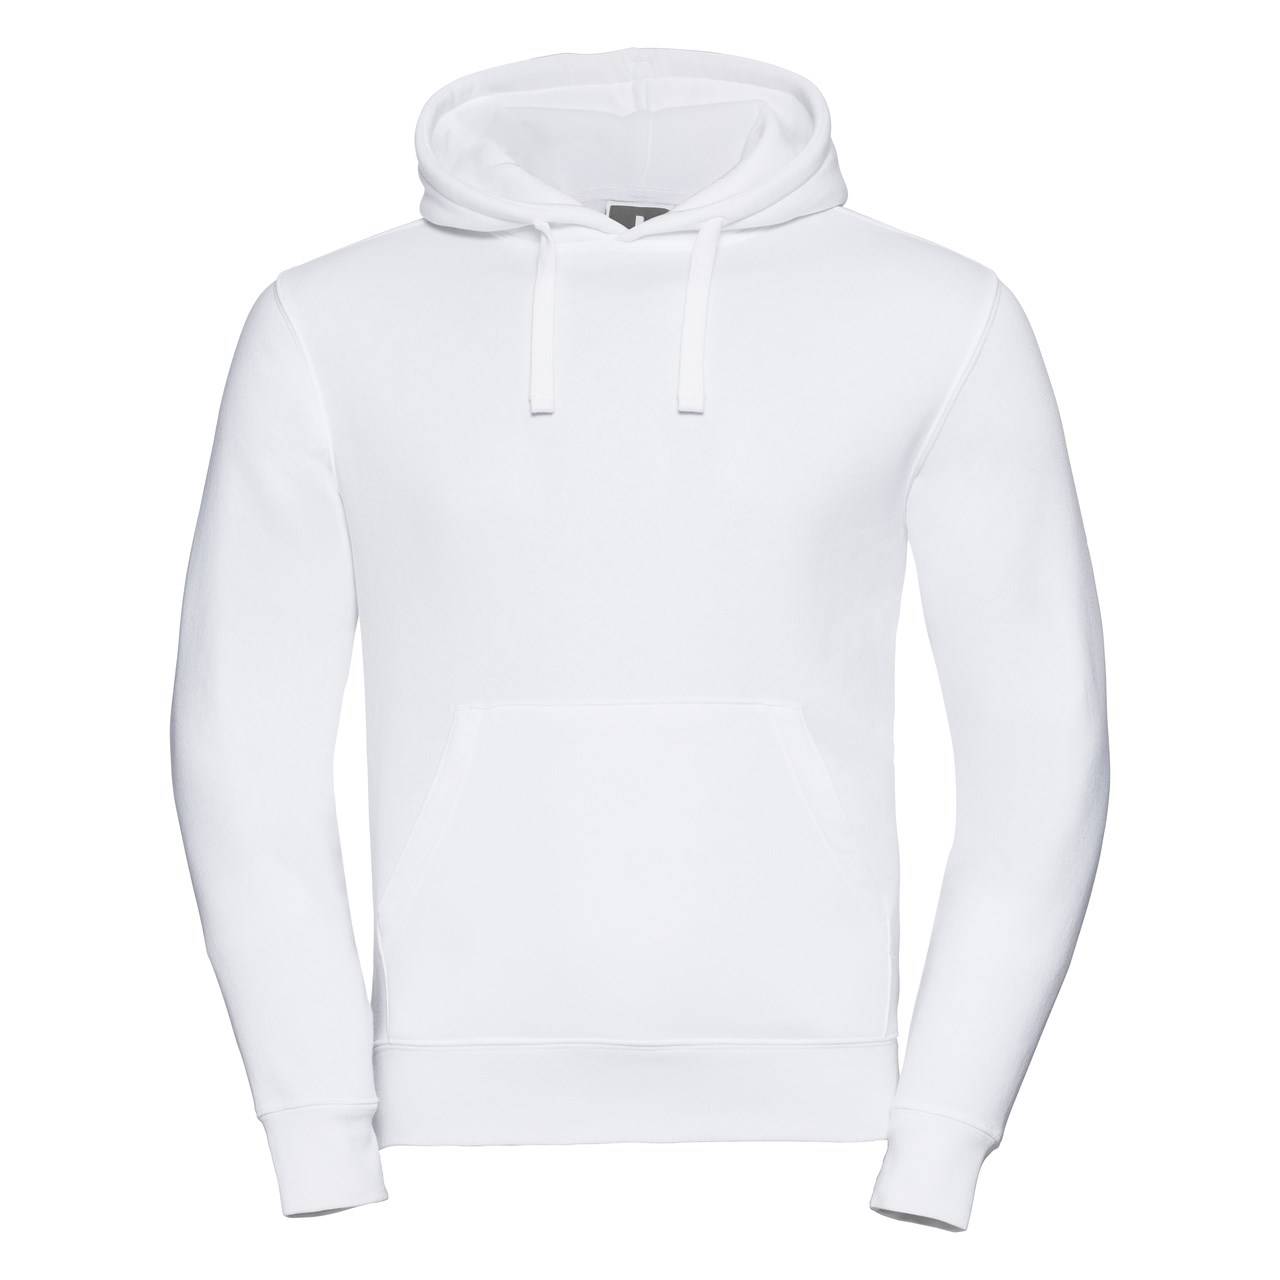 White men's hoodie Authentic Russell